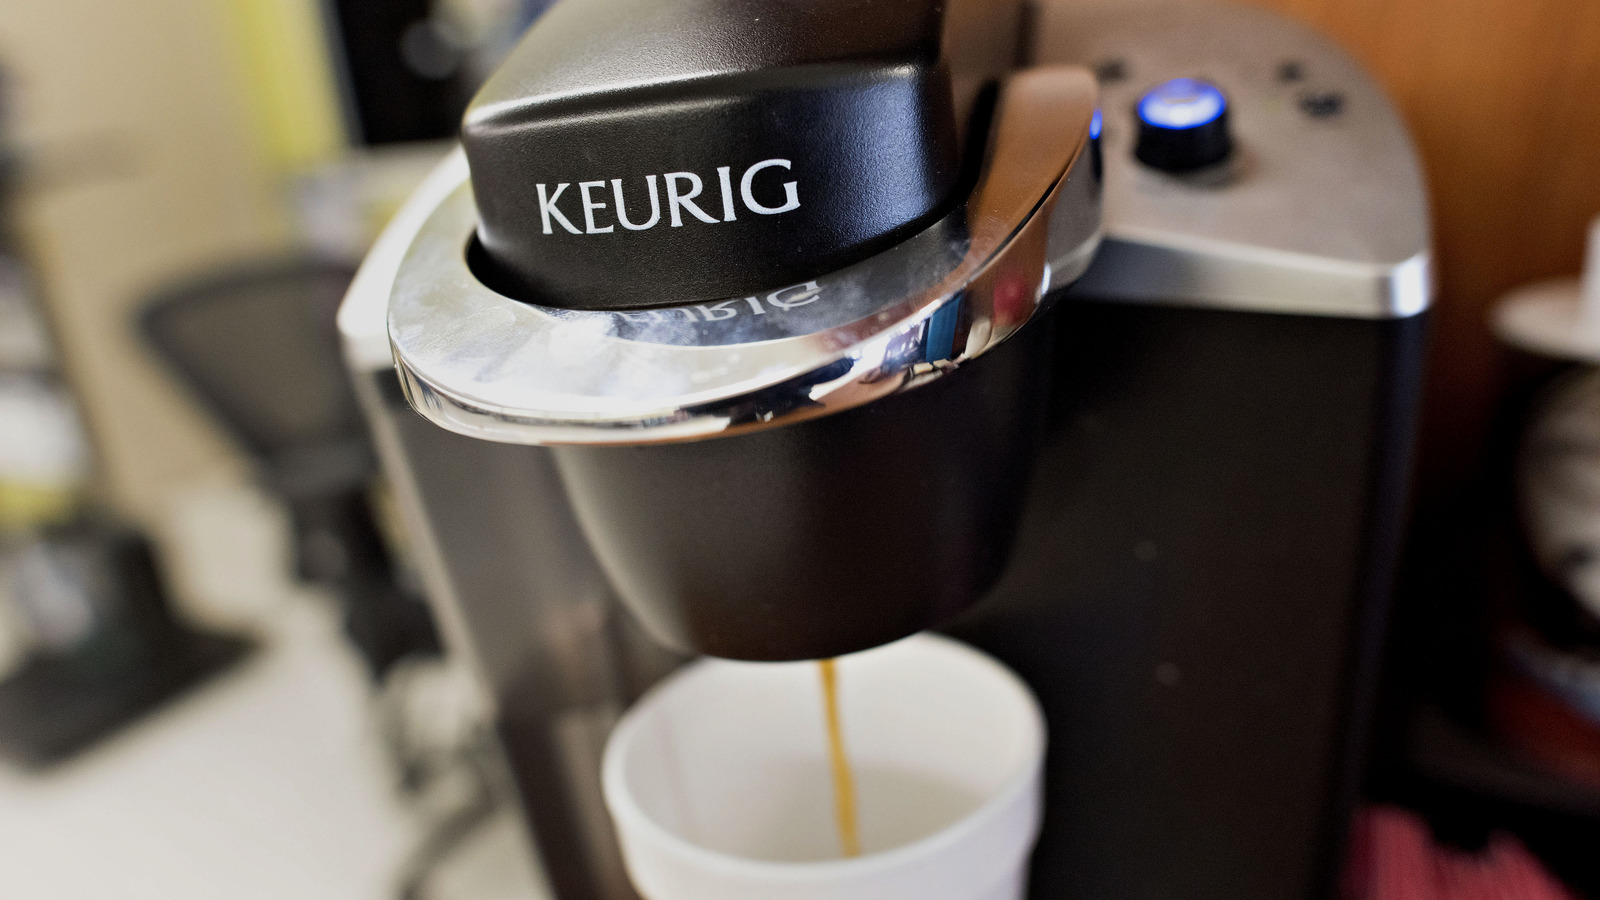 The Clever K-Cup Hack For Stronger Brewed Coffee